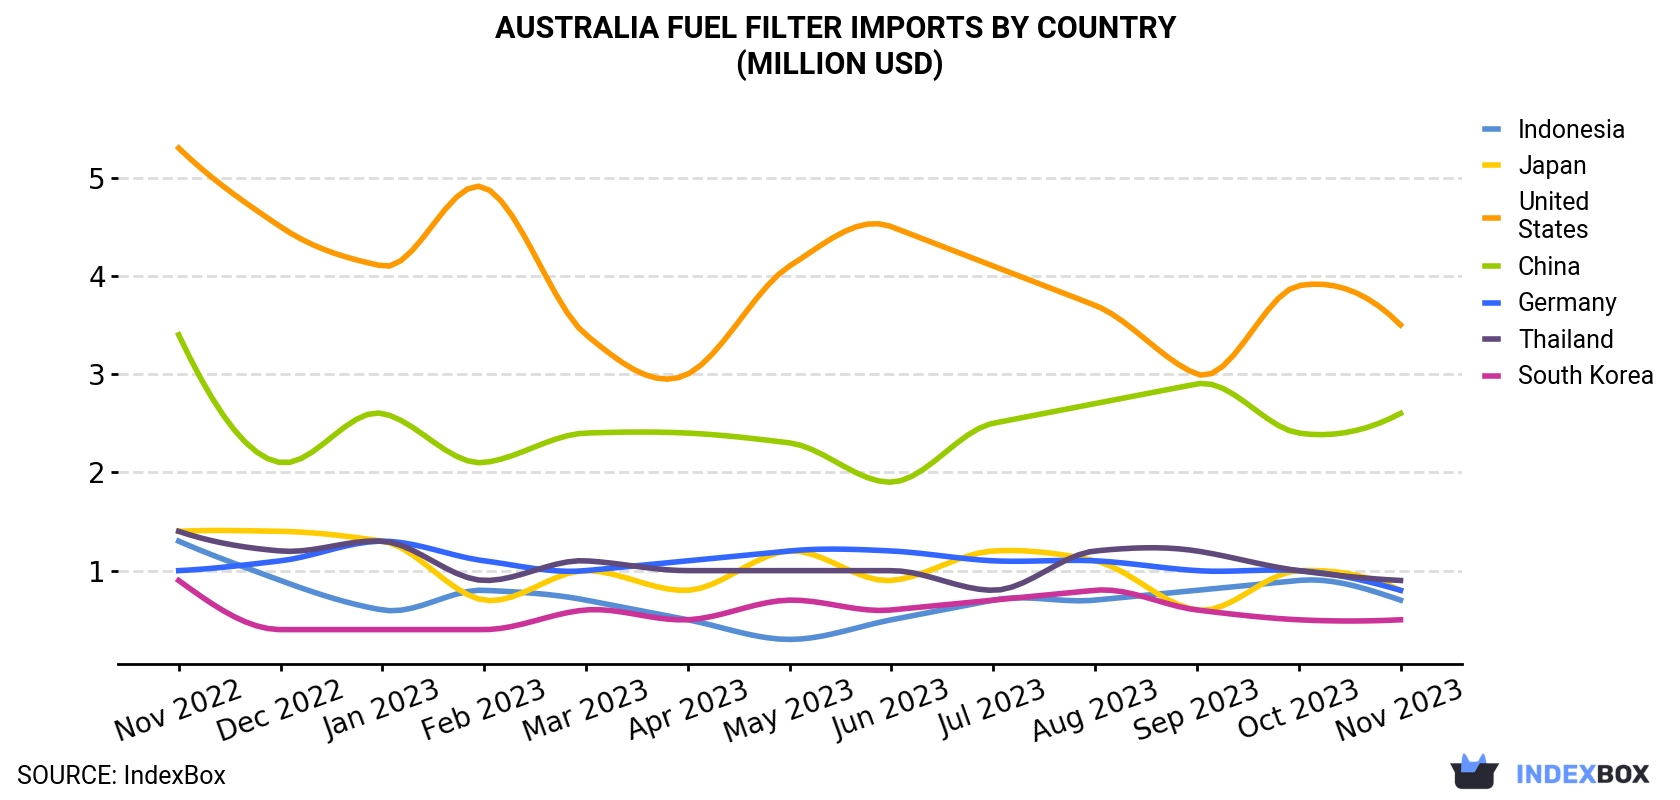 Australia Fuel Filter Imports By Country (Million USD)